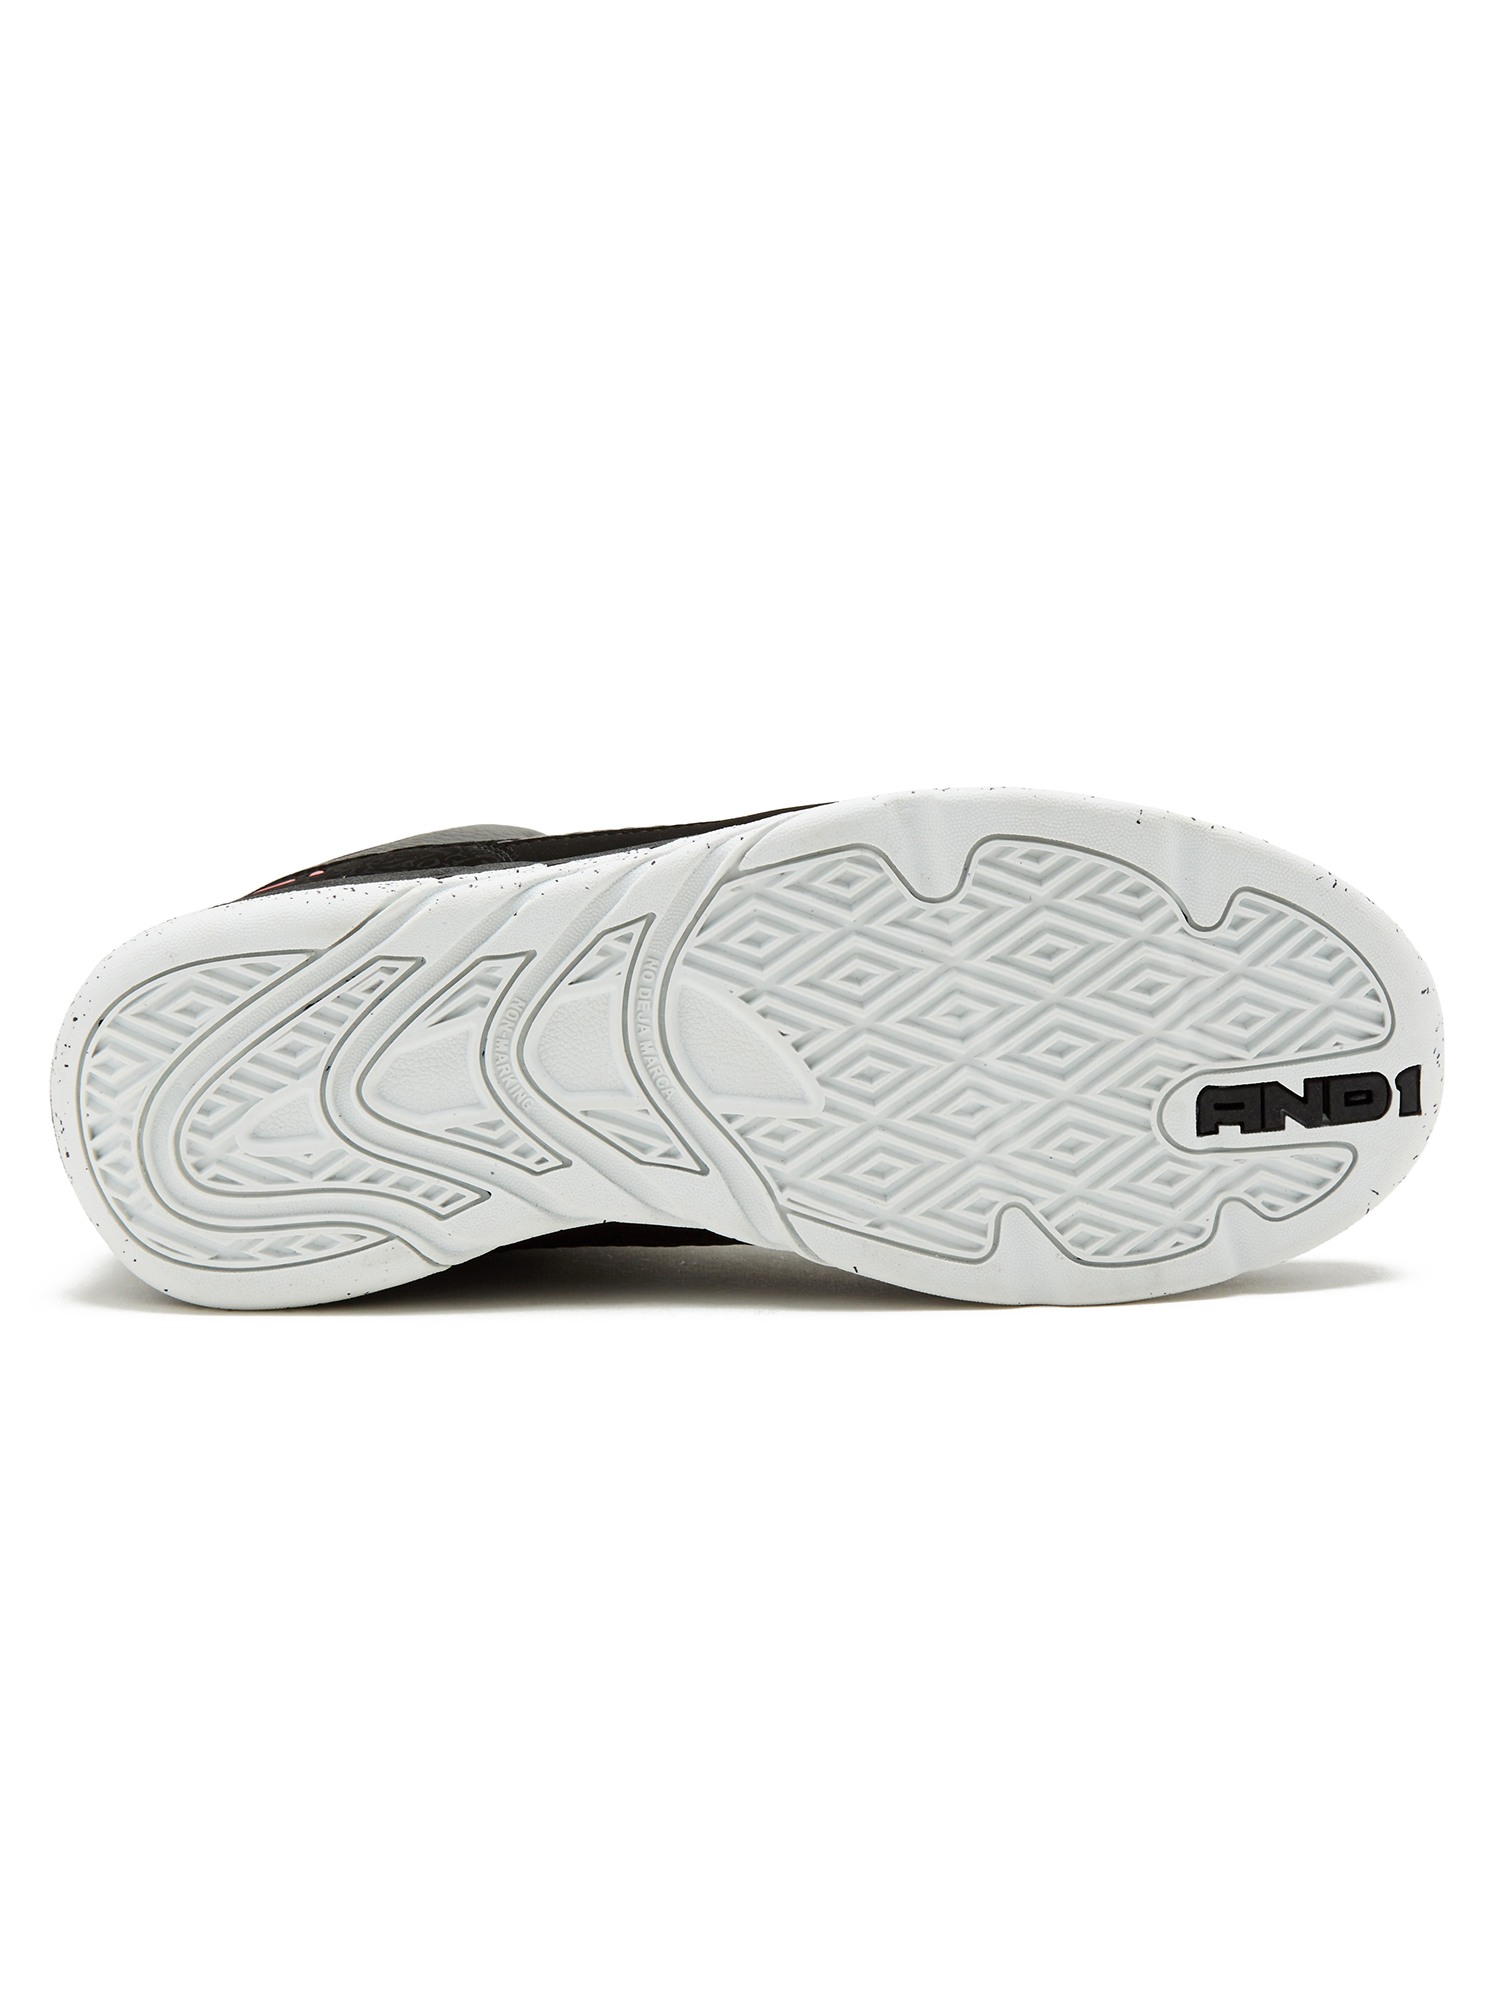 AND1 Men's Capital 2.0 Athletic Shoe - image 5 of 5